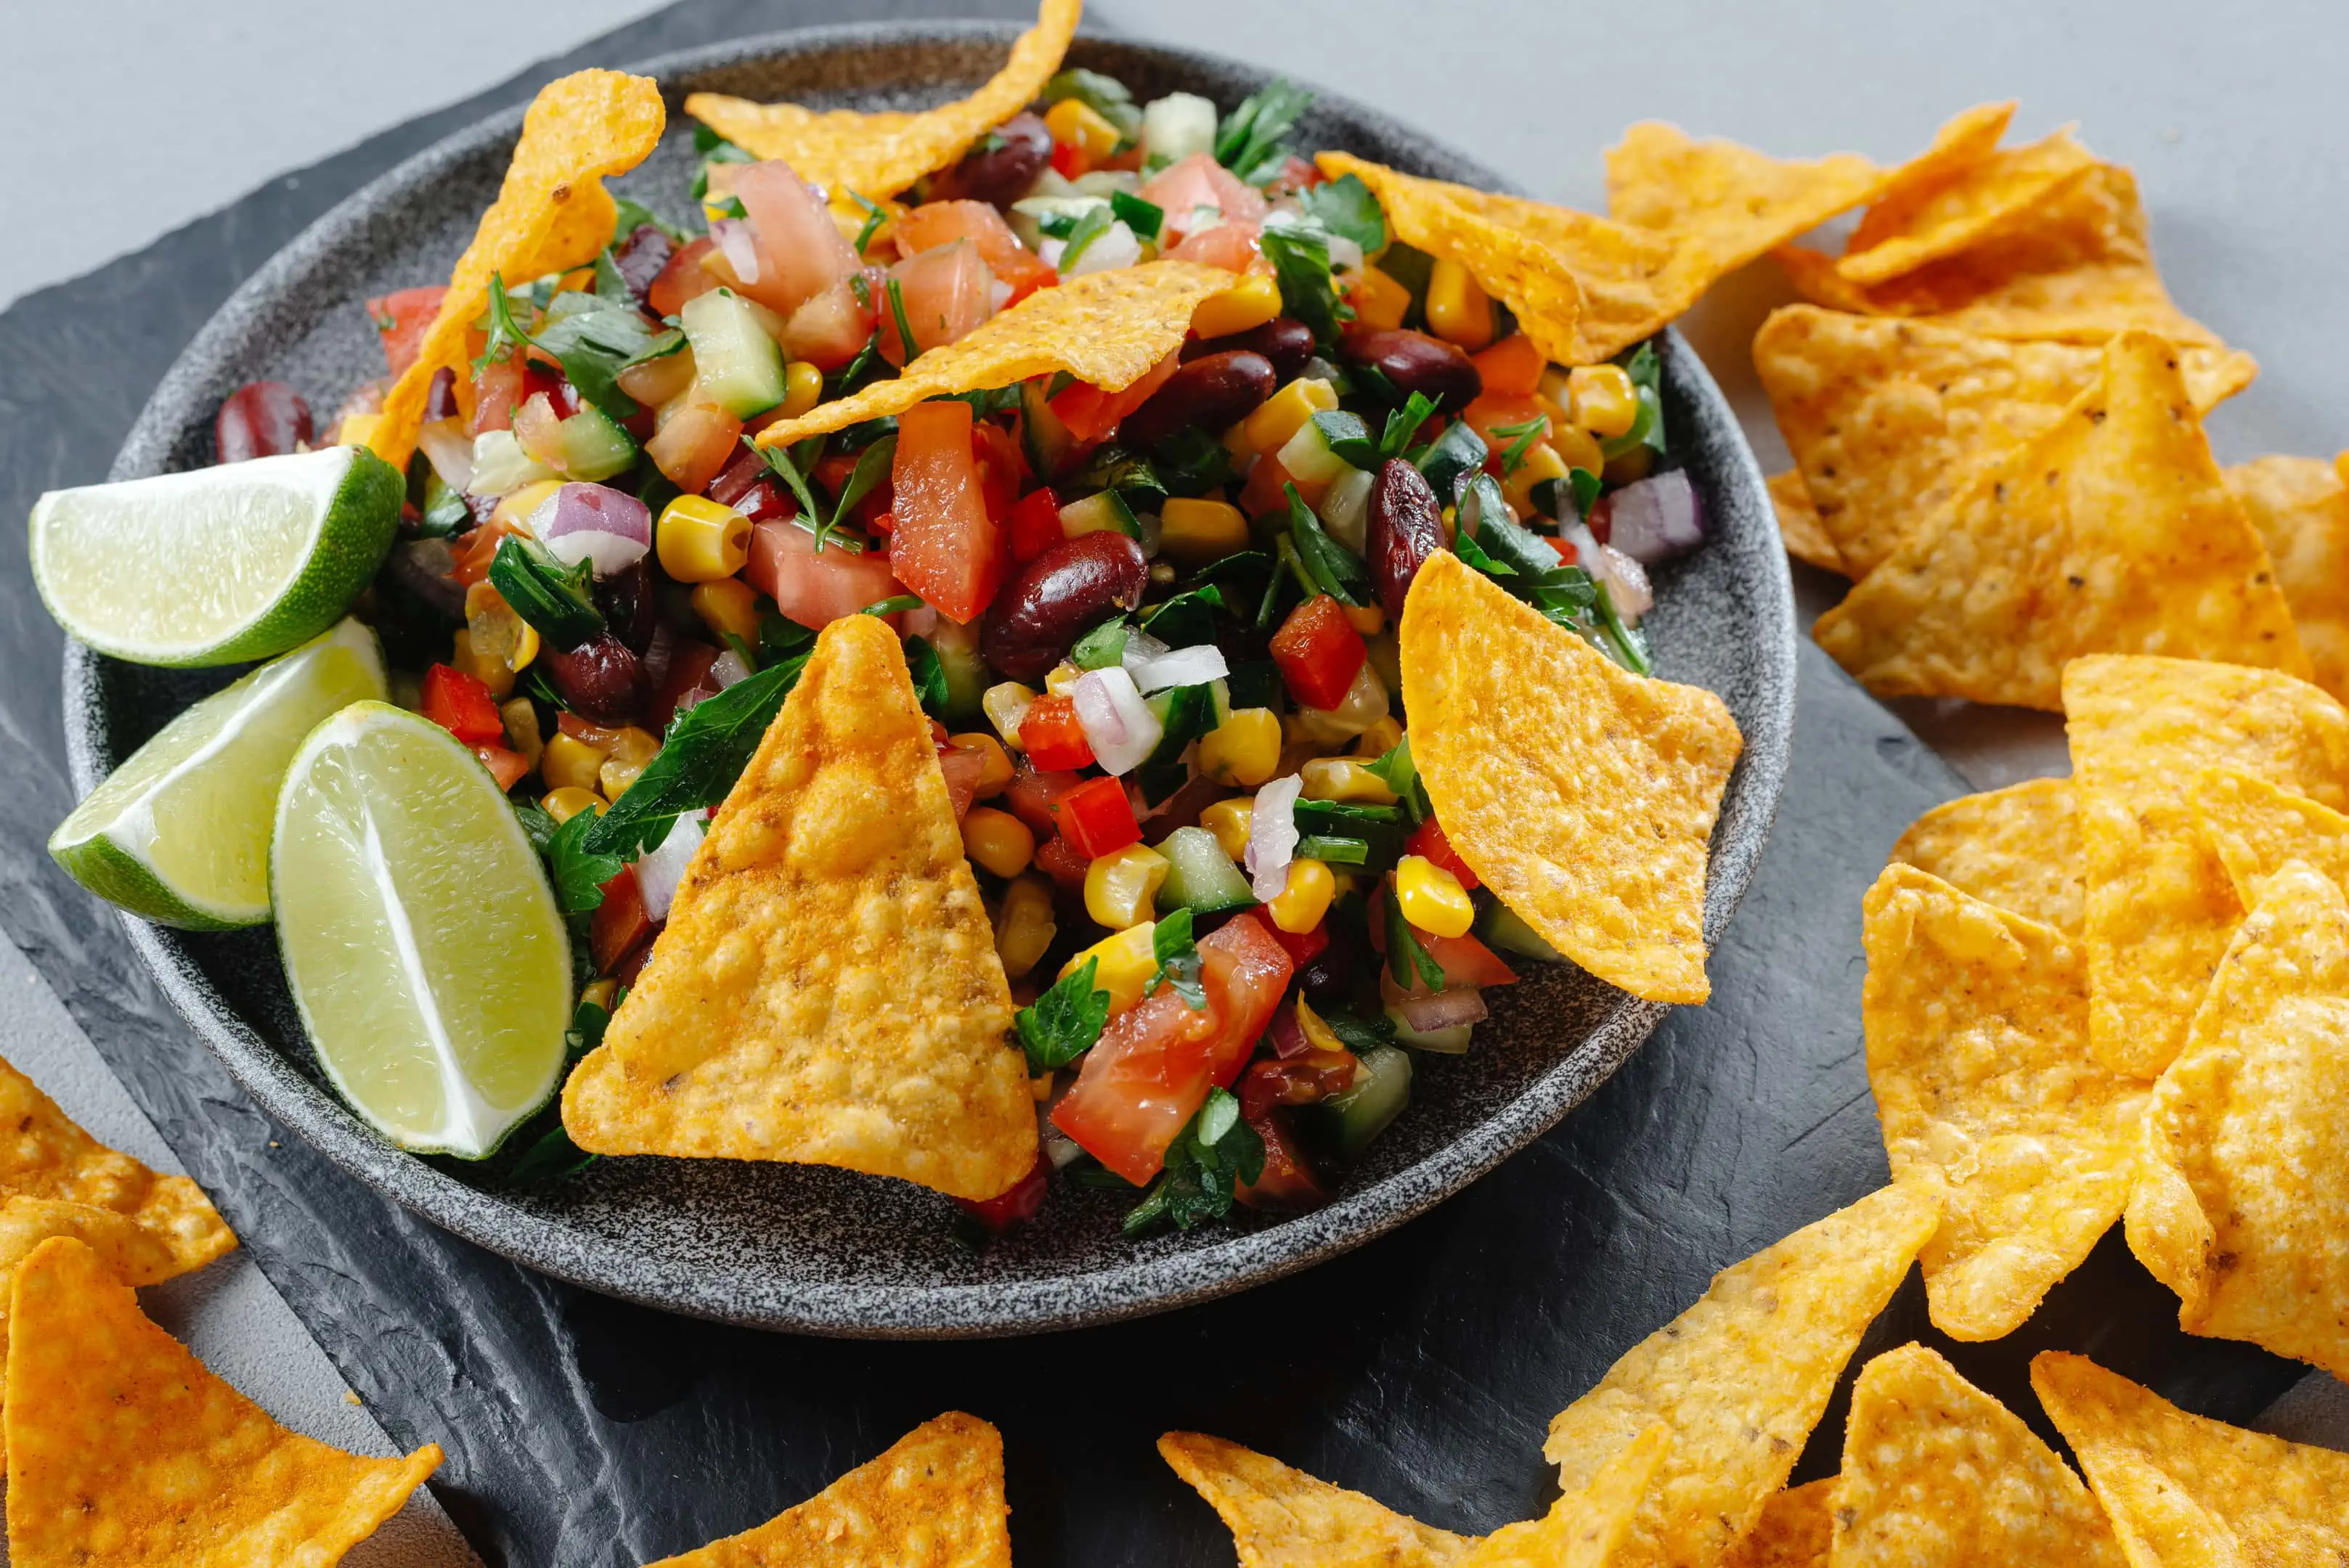 Texas cowboy caviar — Pioneer Woman's — with chips nachos and lemon